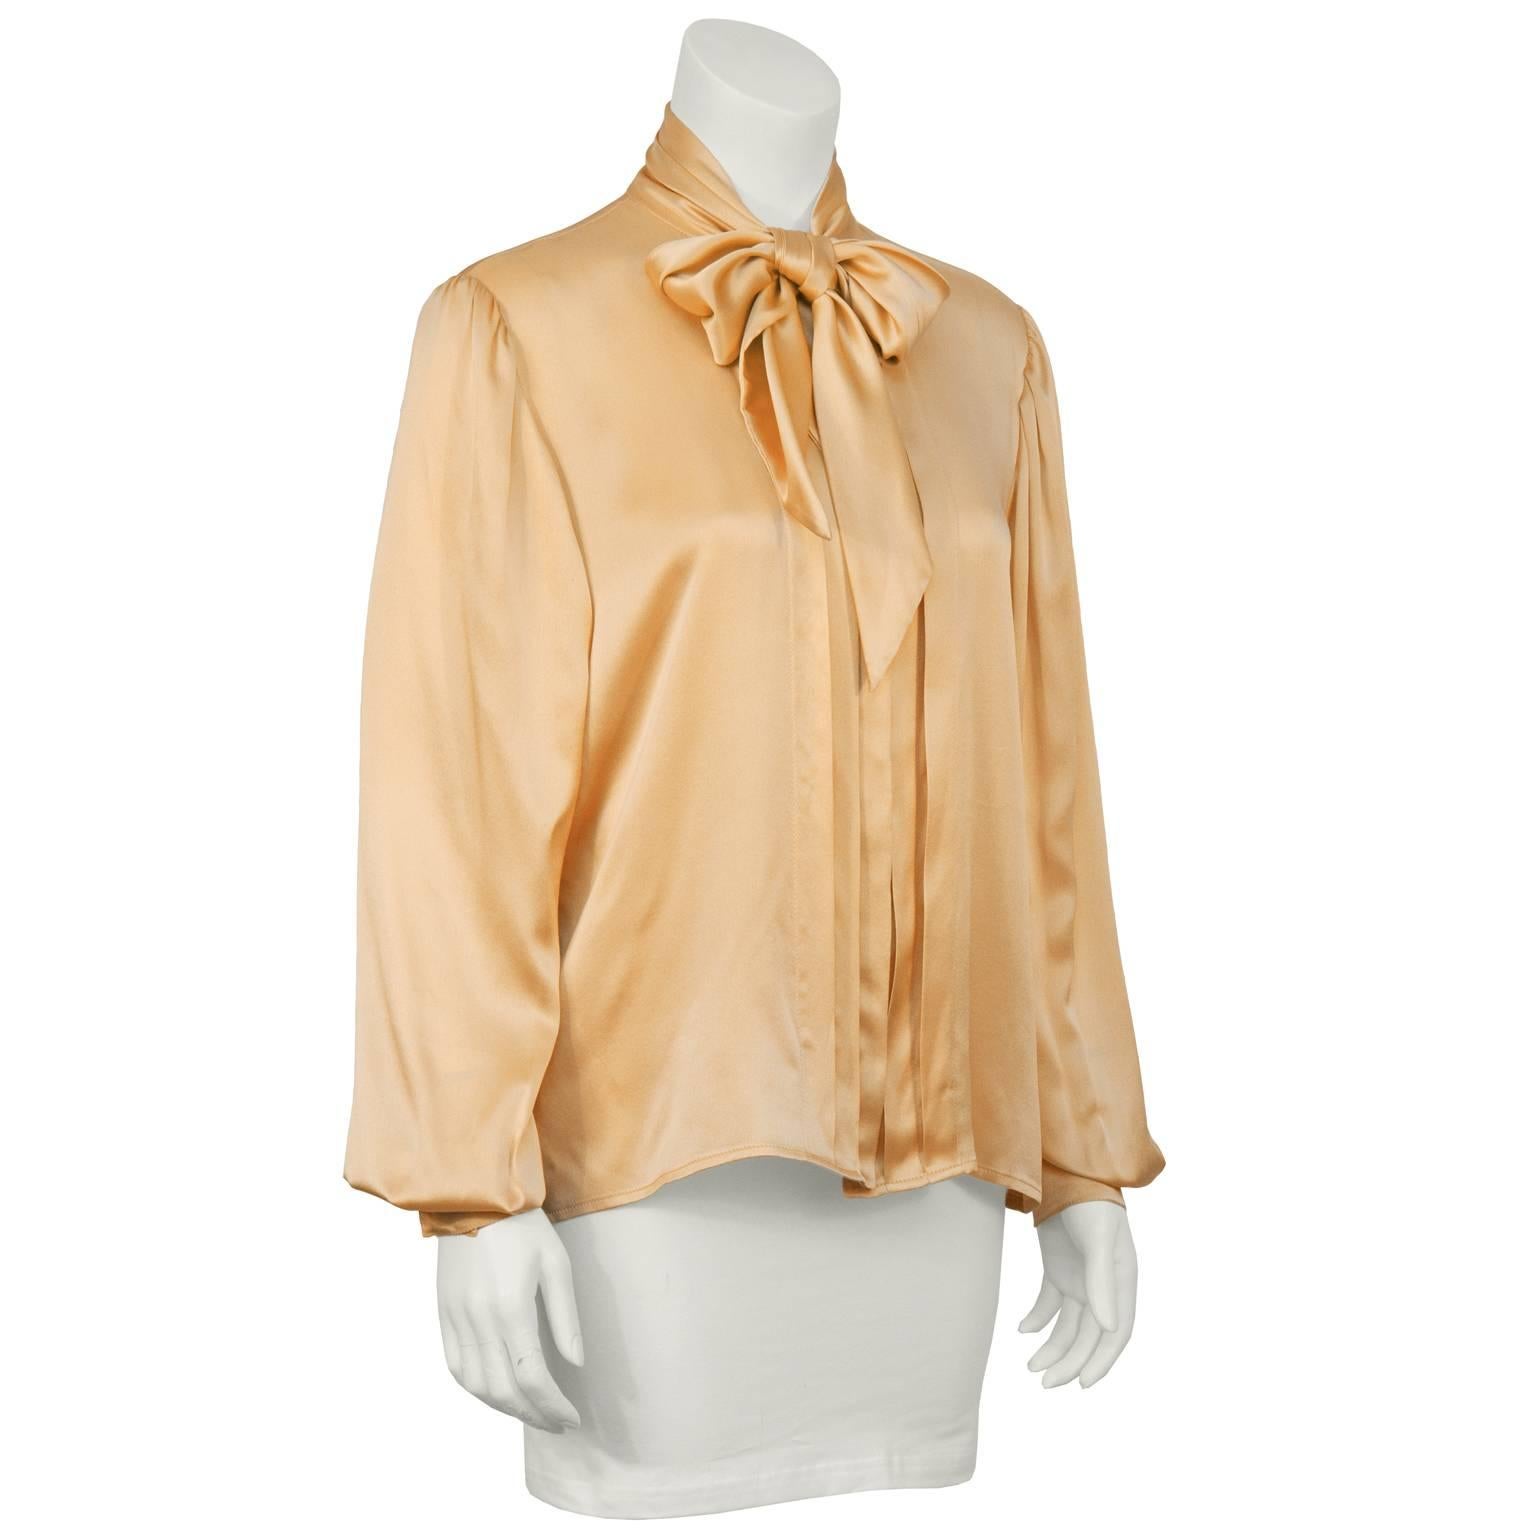 Ungaro Parallele blush peach silk necktie blouse from the 1980's. Features a pleated placket down the front hiding buttons, finished with a self tie bow at the neck. The cuffed sleeves feature faux mother of pearl buttons and there is a single box